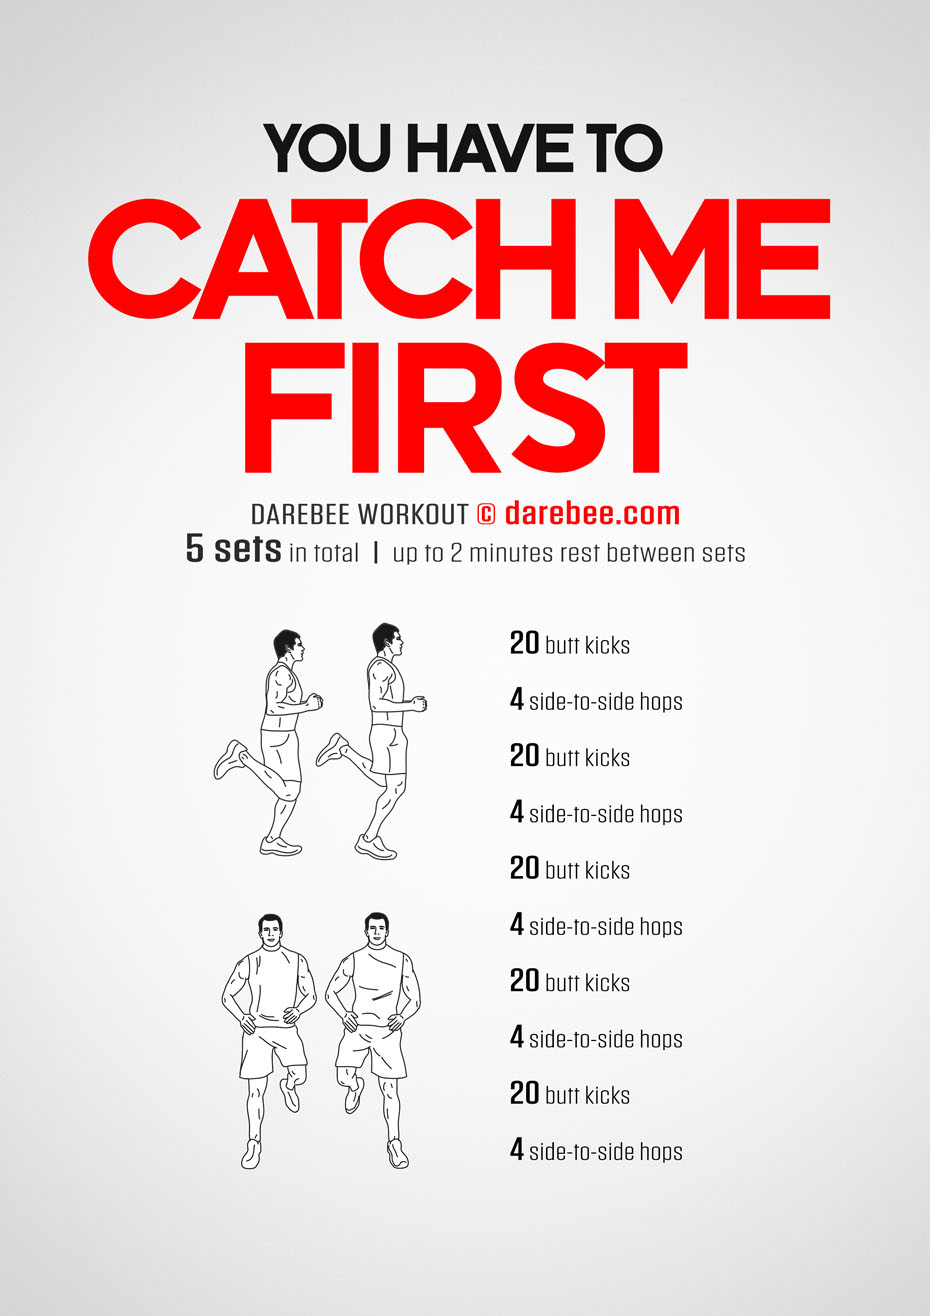 You Have To Catch Me First is a Darebee home-fitness mobility/agility workout that helps you become lighter on your feet.